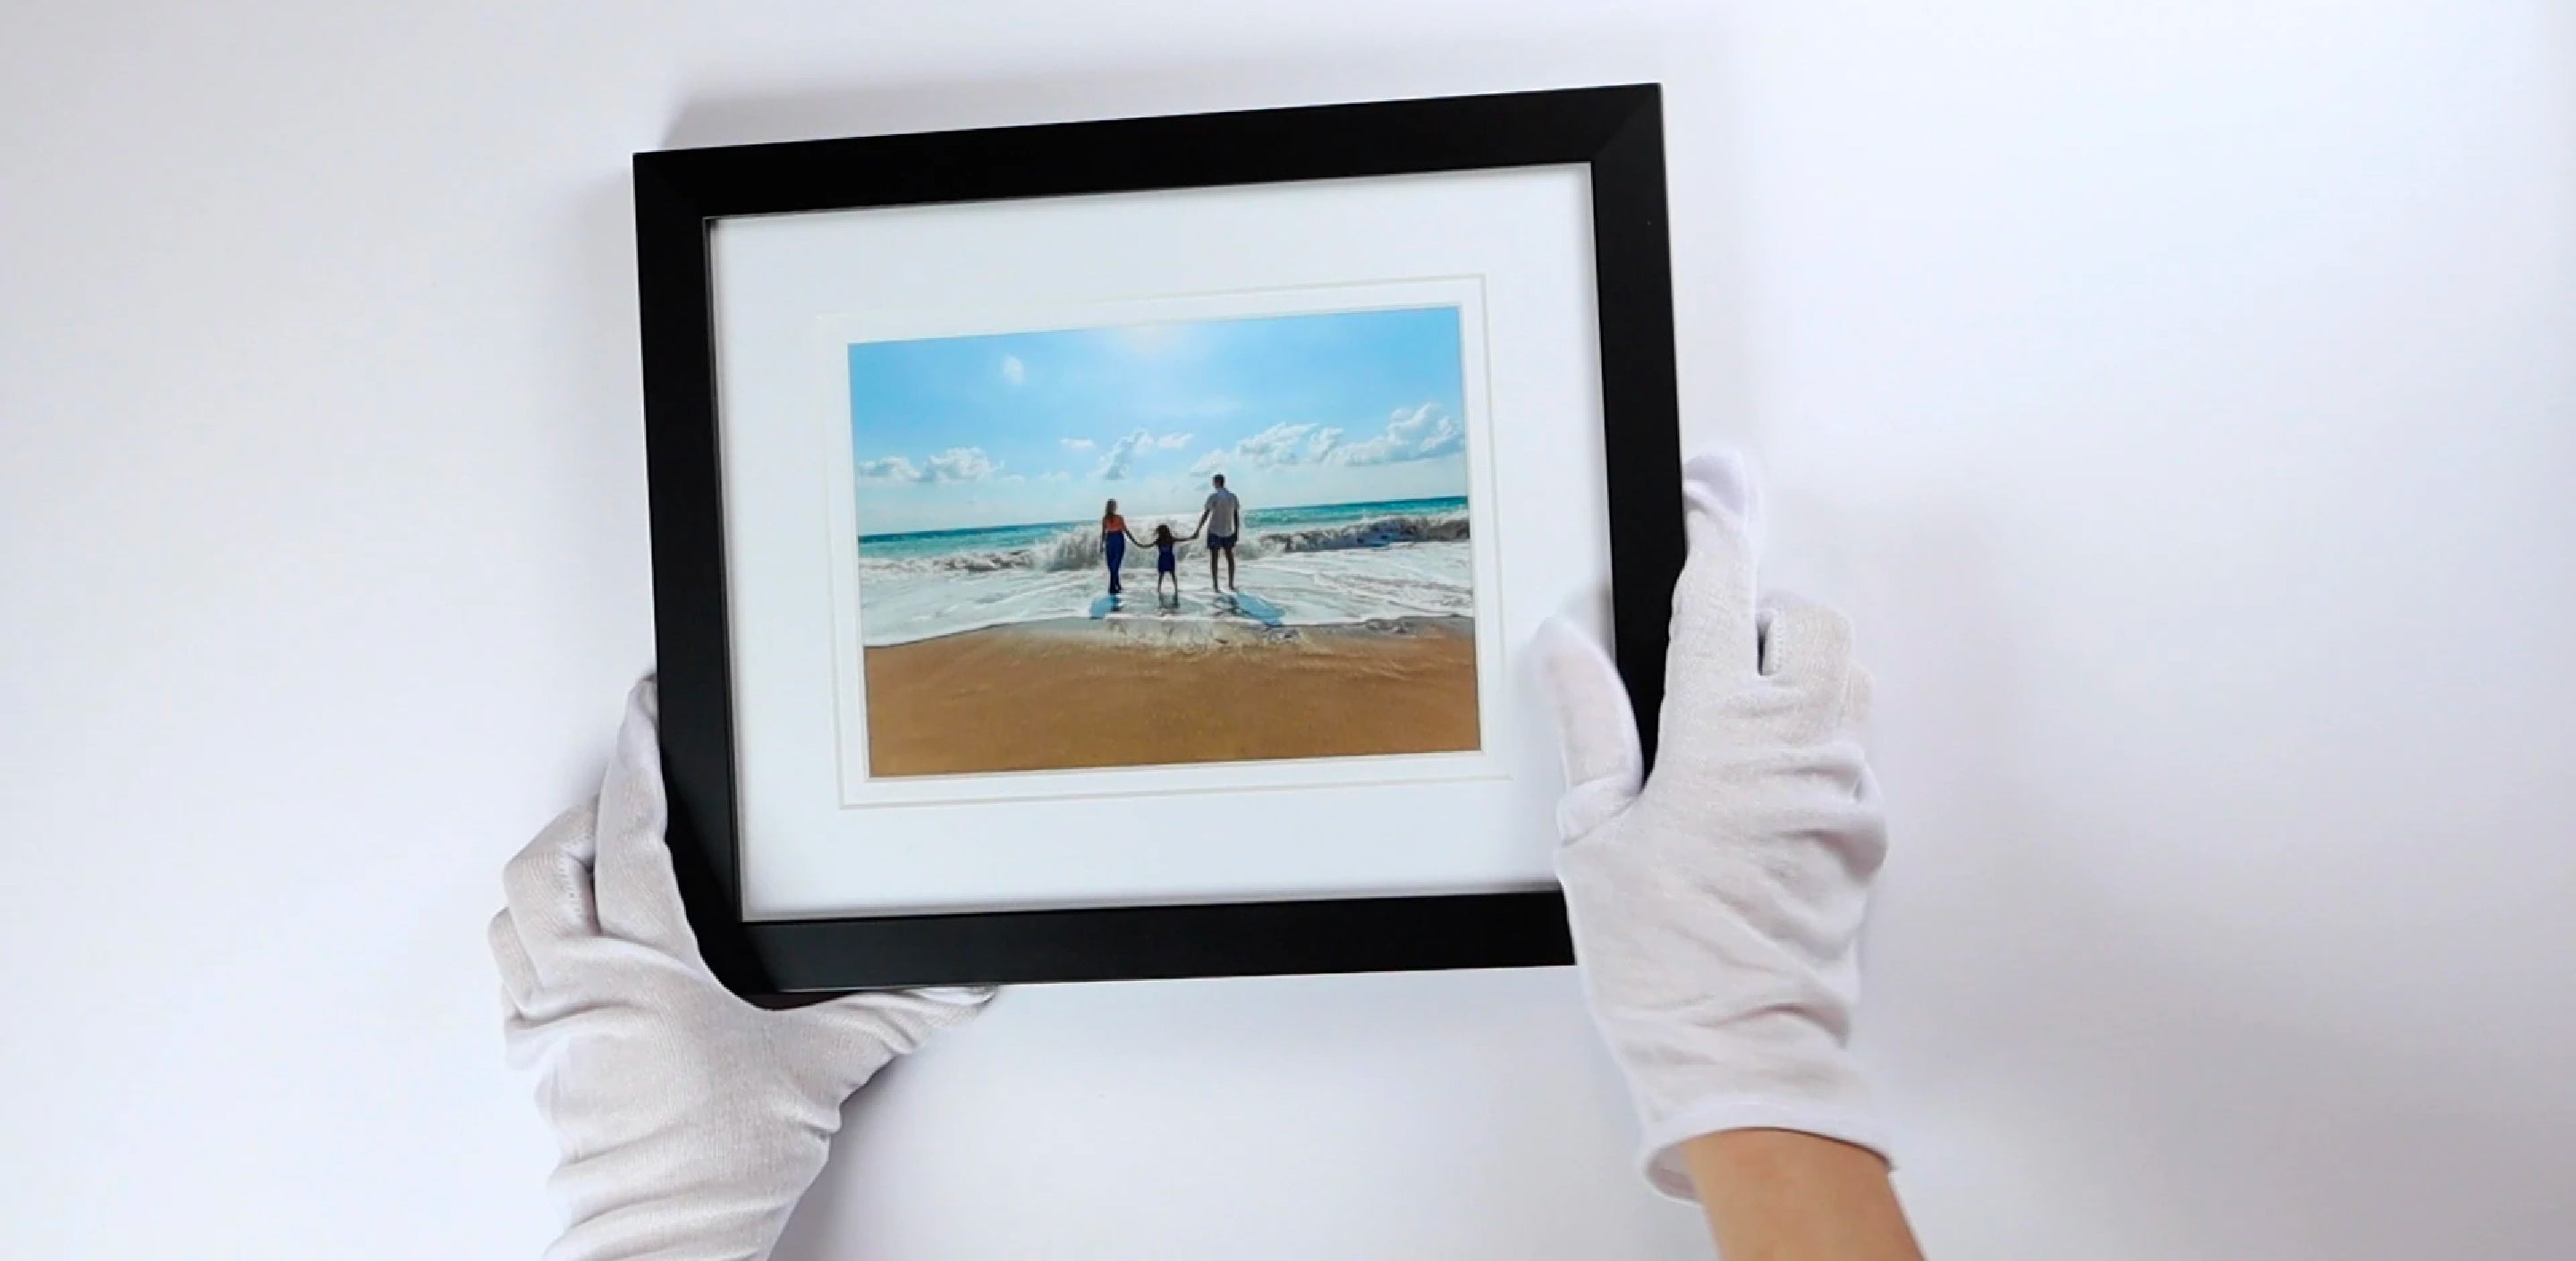 How to Insert Your Photos Into a Matted Photo Frame - Our Step-by-Step